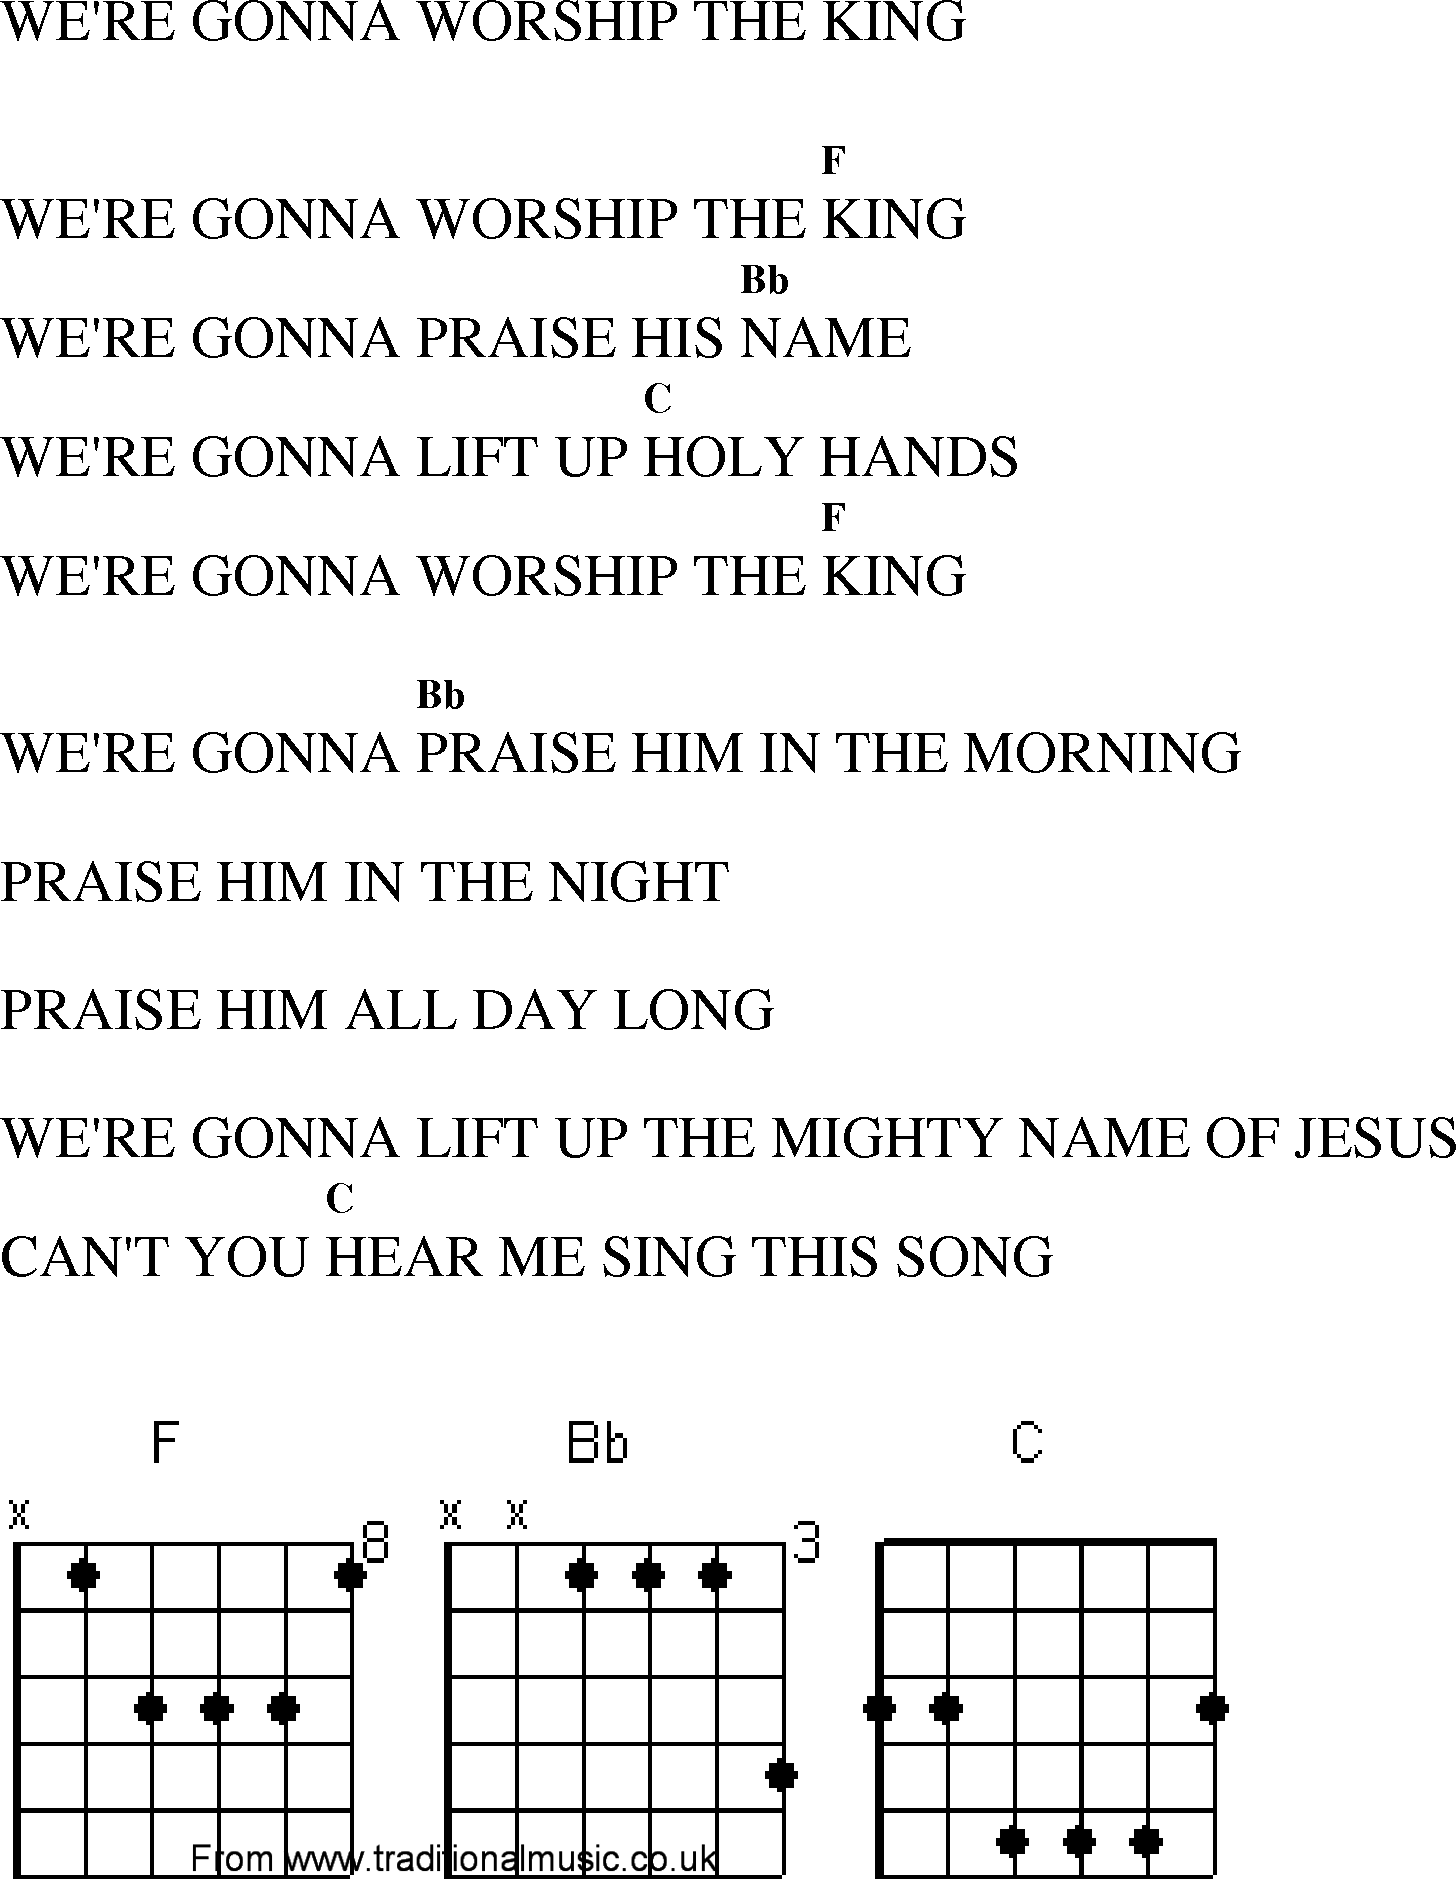 Gospel Song: were_gonna_worship_the_king, lyrics and chords.